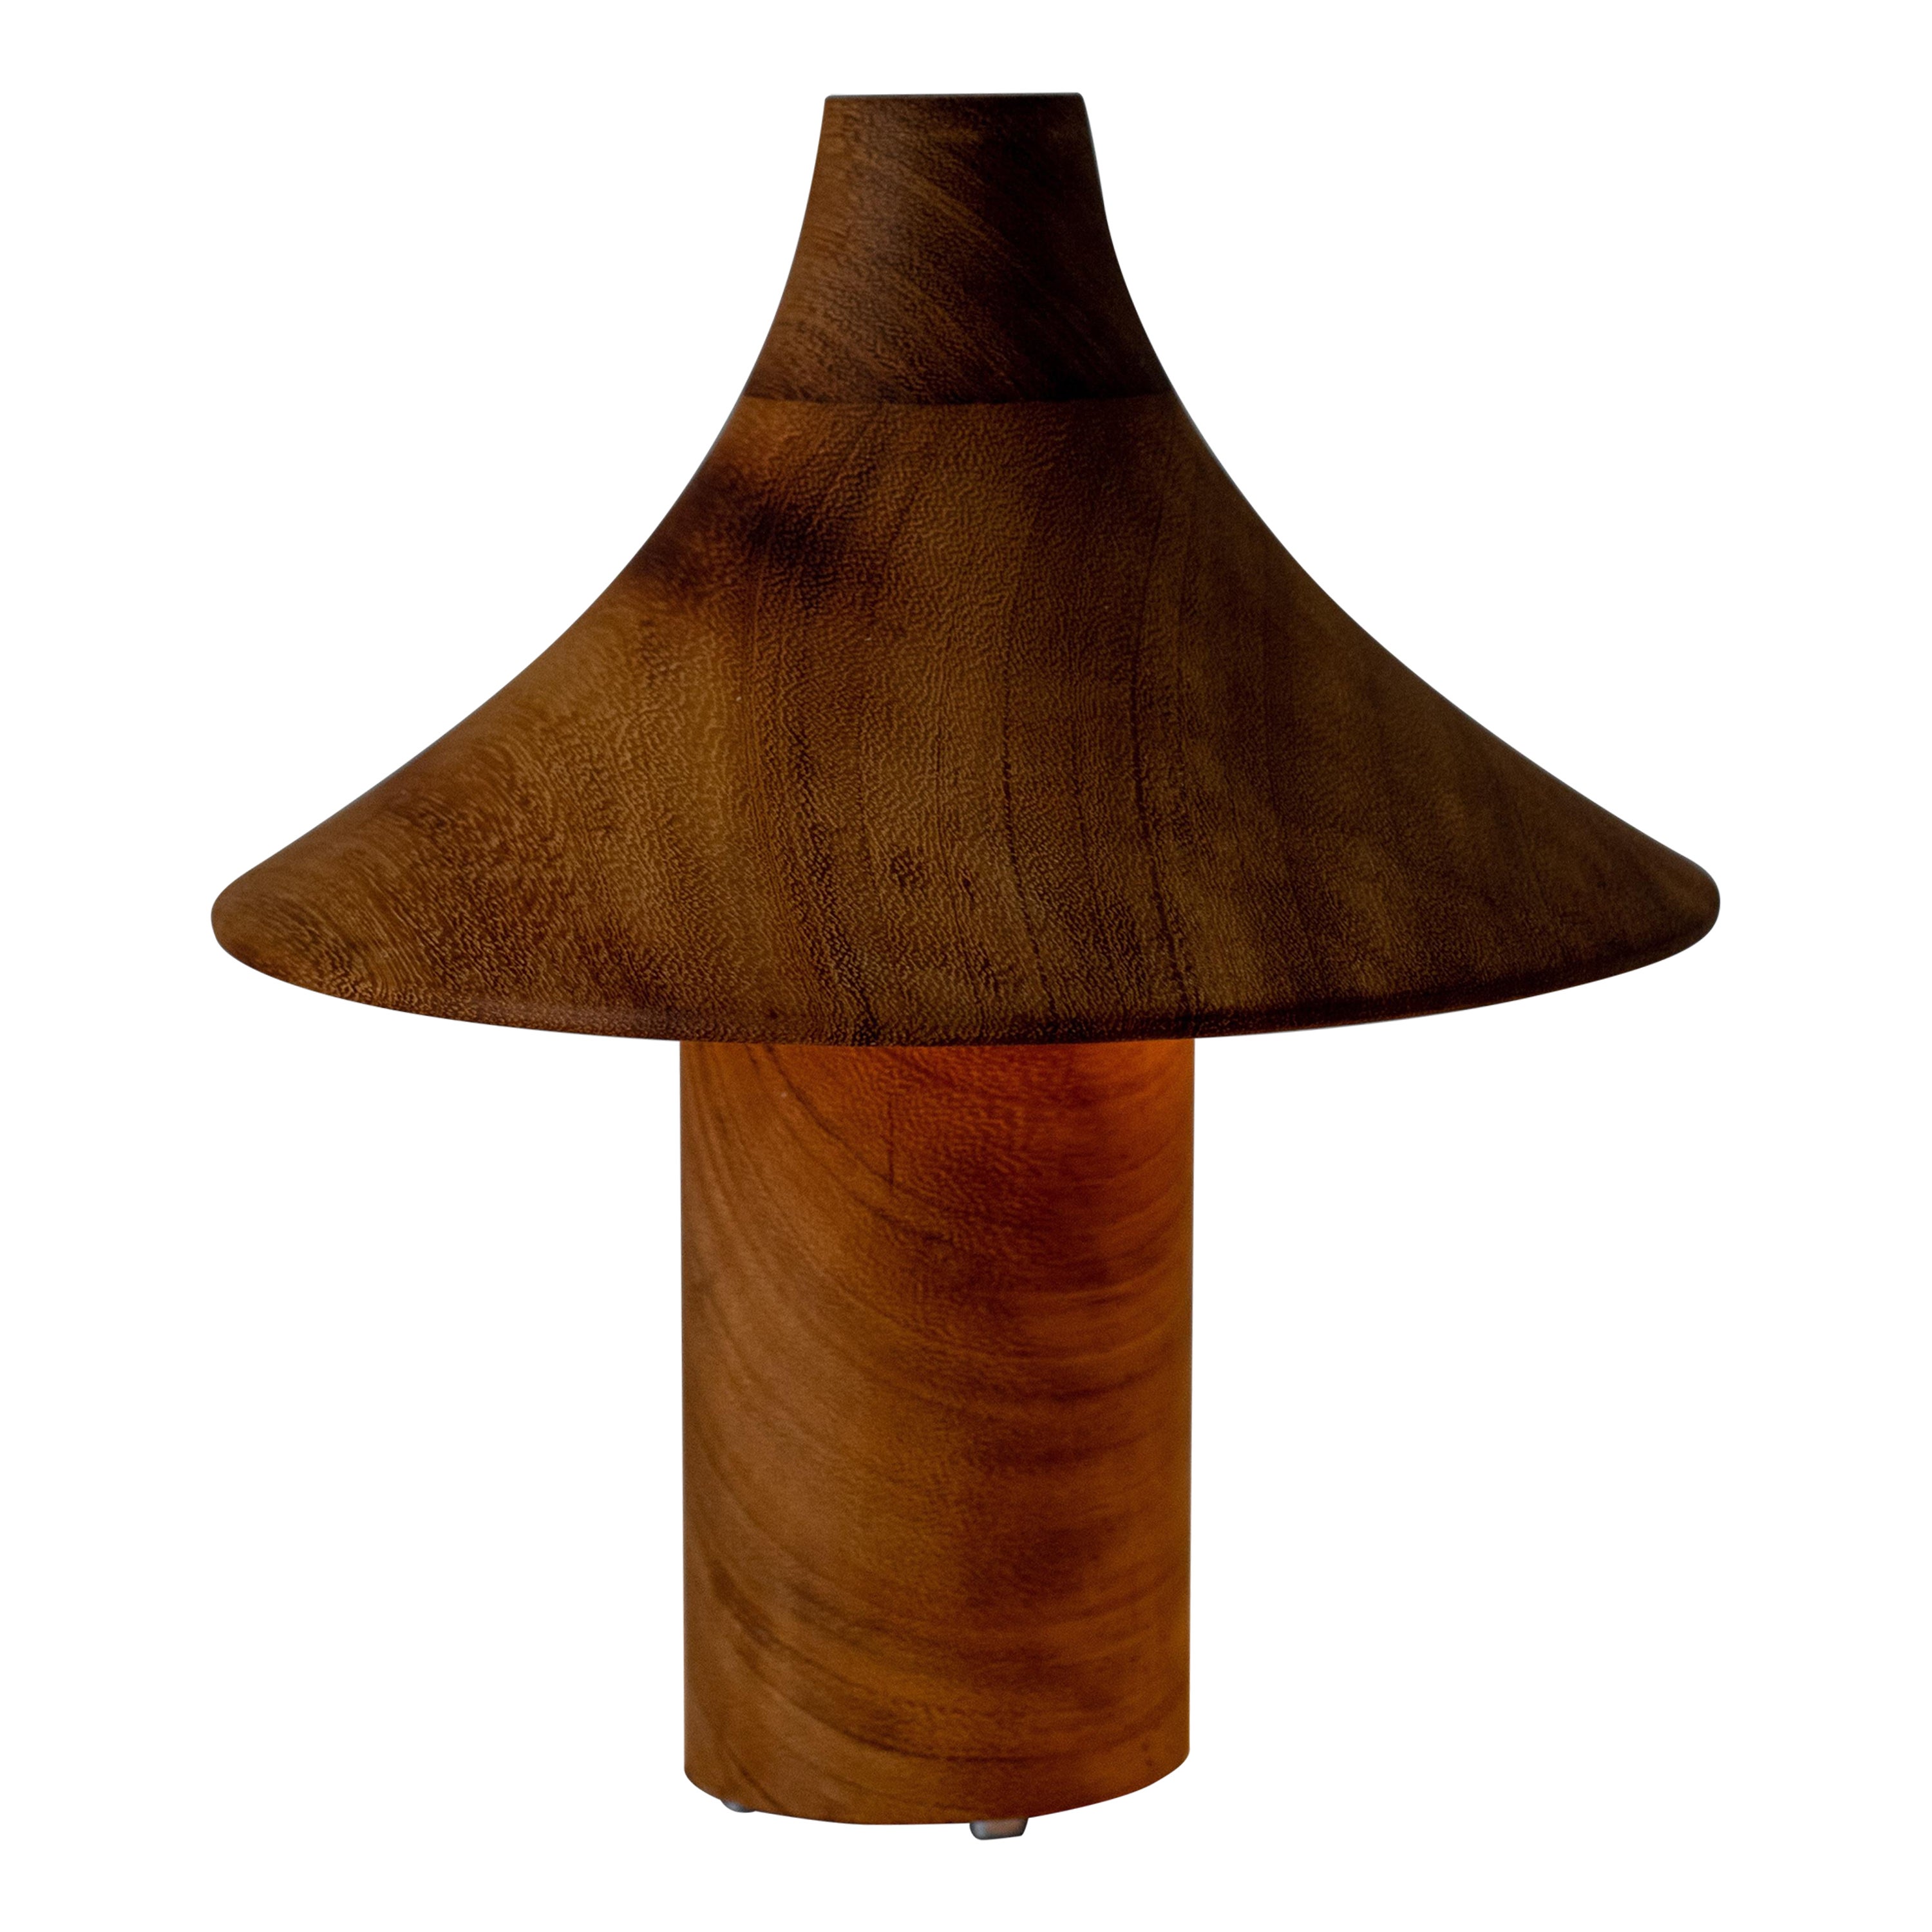 "Hat" Lamp in hand-turned teak wood and metal fixtures. For Sale